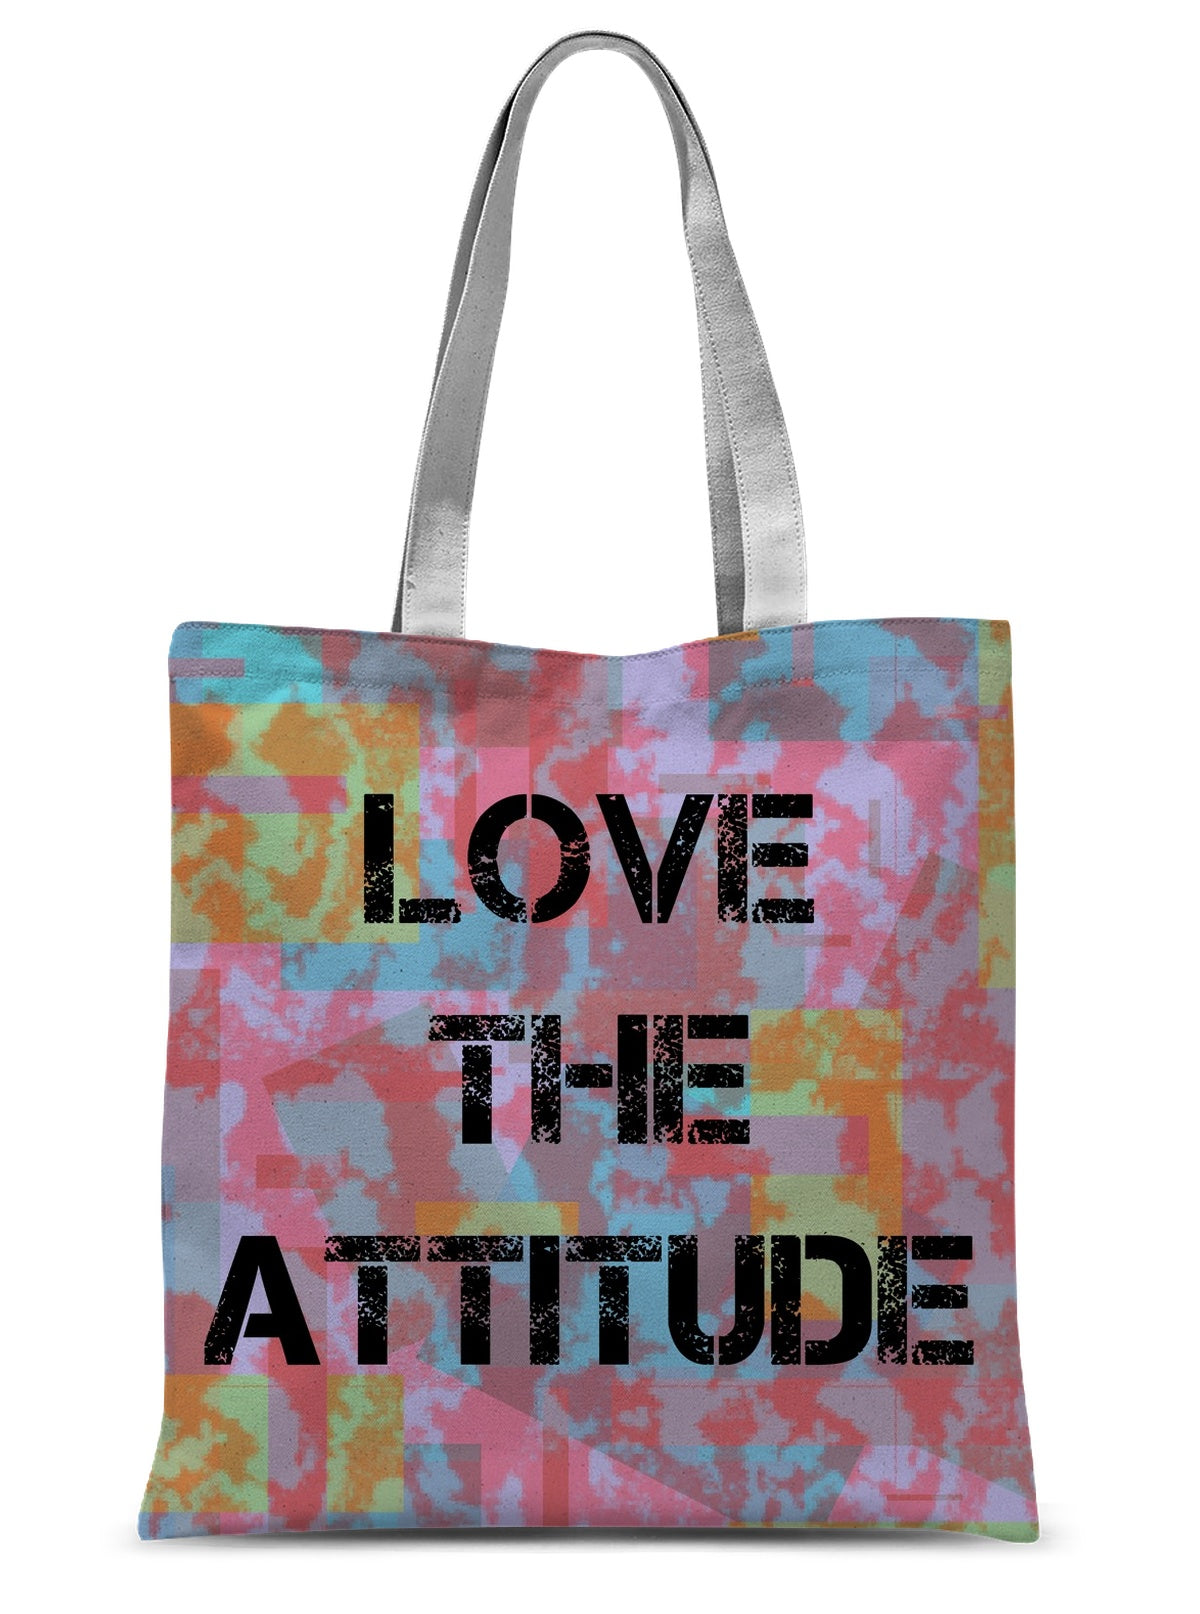 This retro style shopping tote design consists of colorful abstract background with the words Love the Attitude emblazoned across the front